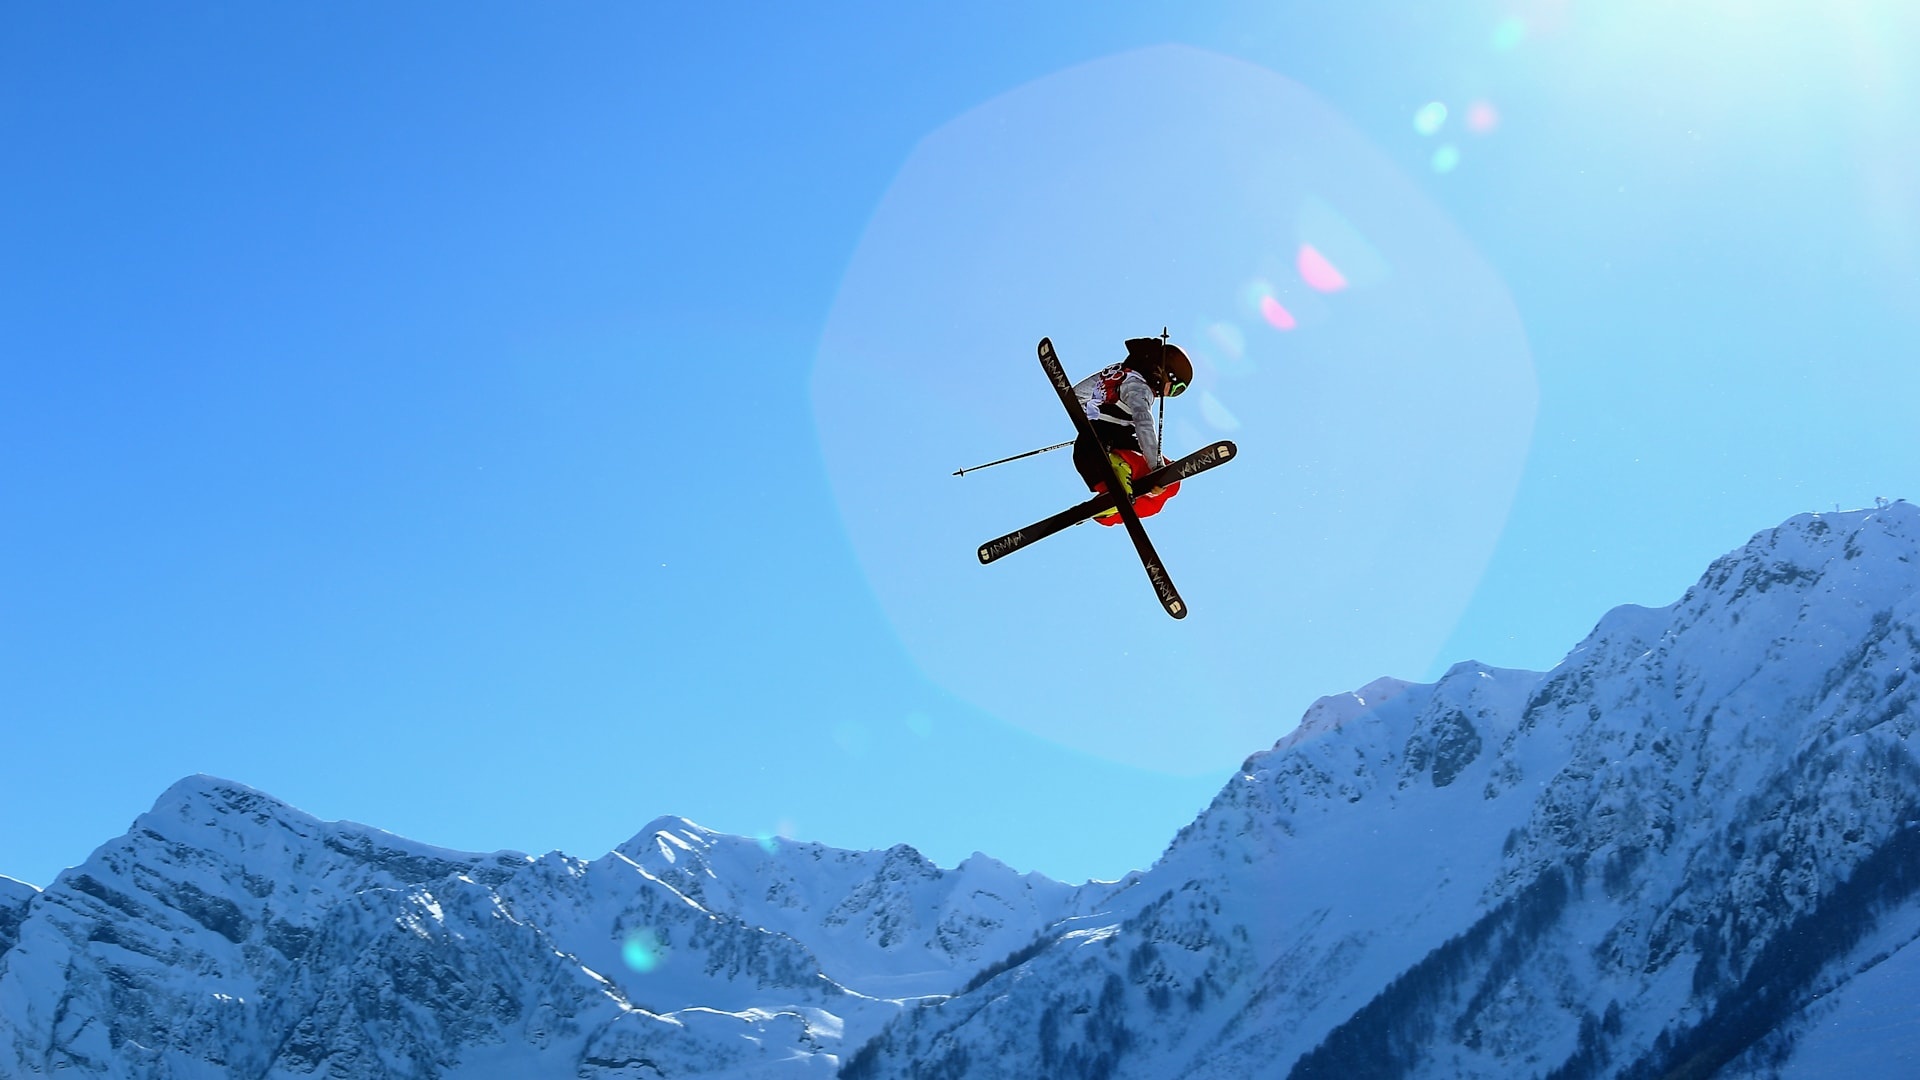 Skiing: Freestyle Skiing, Extreme winter sports, Downhill, Cross-country distance. 1920x1080 Full HD Background.